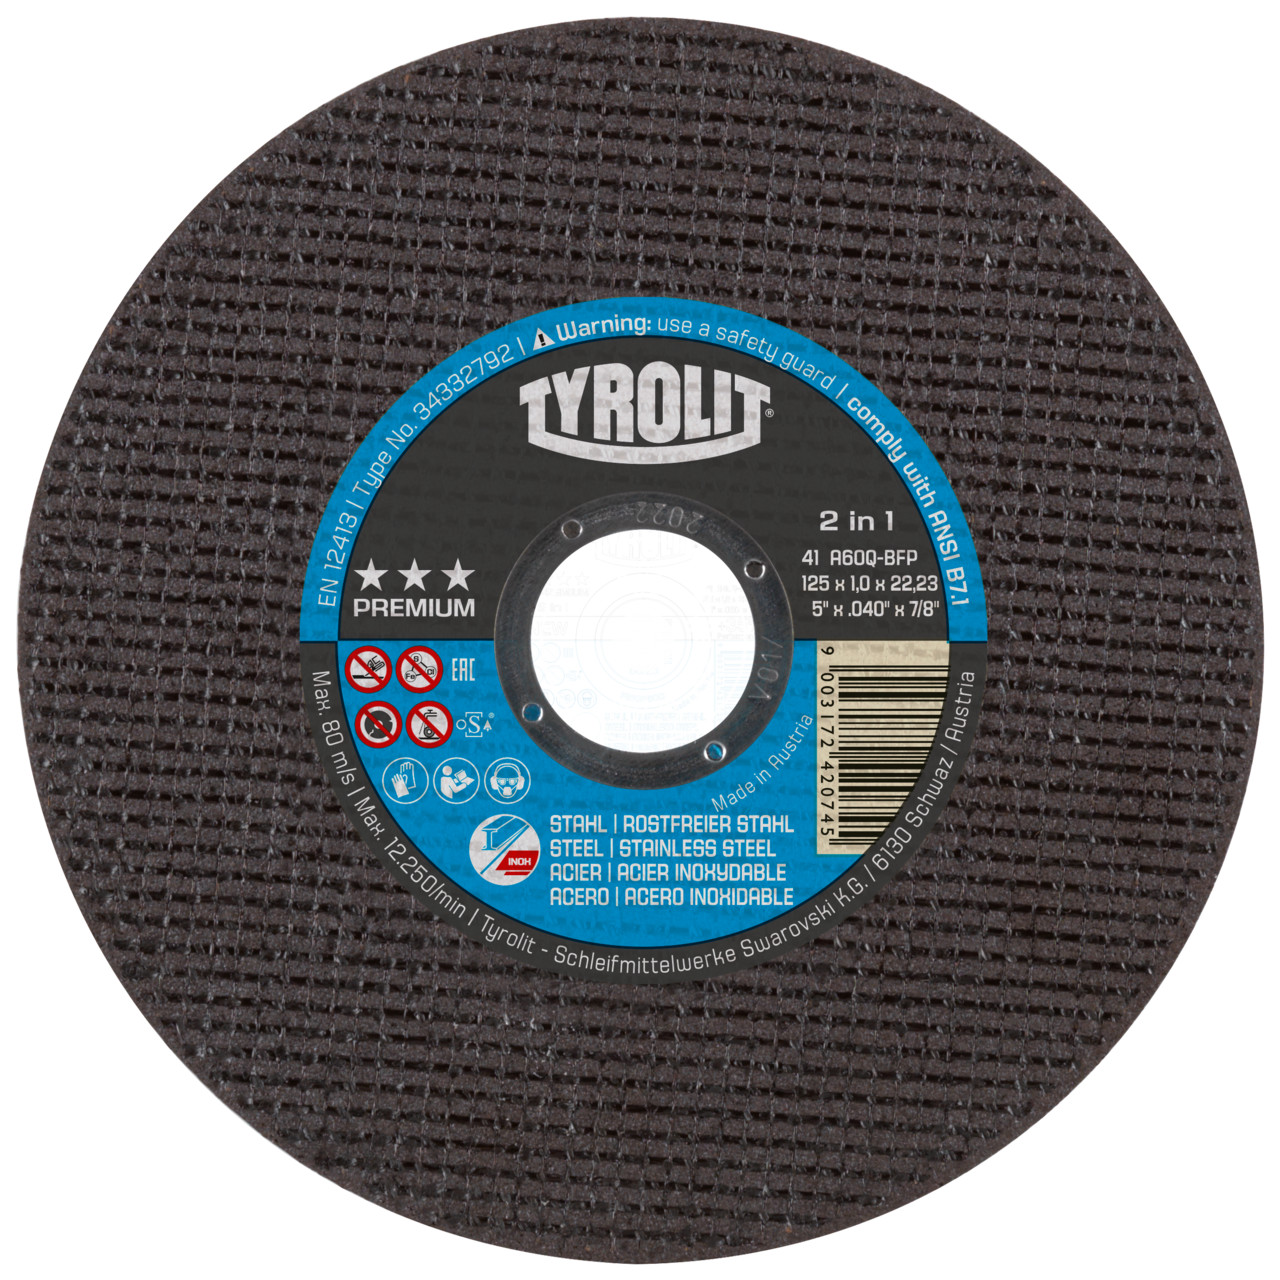 TYROLIT cut-off wheels DxDxH 178x2.5x22.23 2in1 for steel and stainless steel, shape: 41 - straight version, Art. 872341